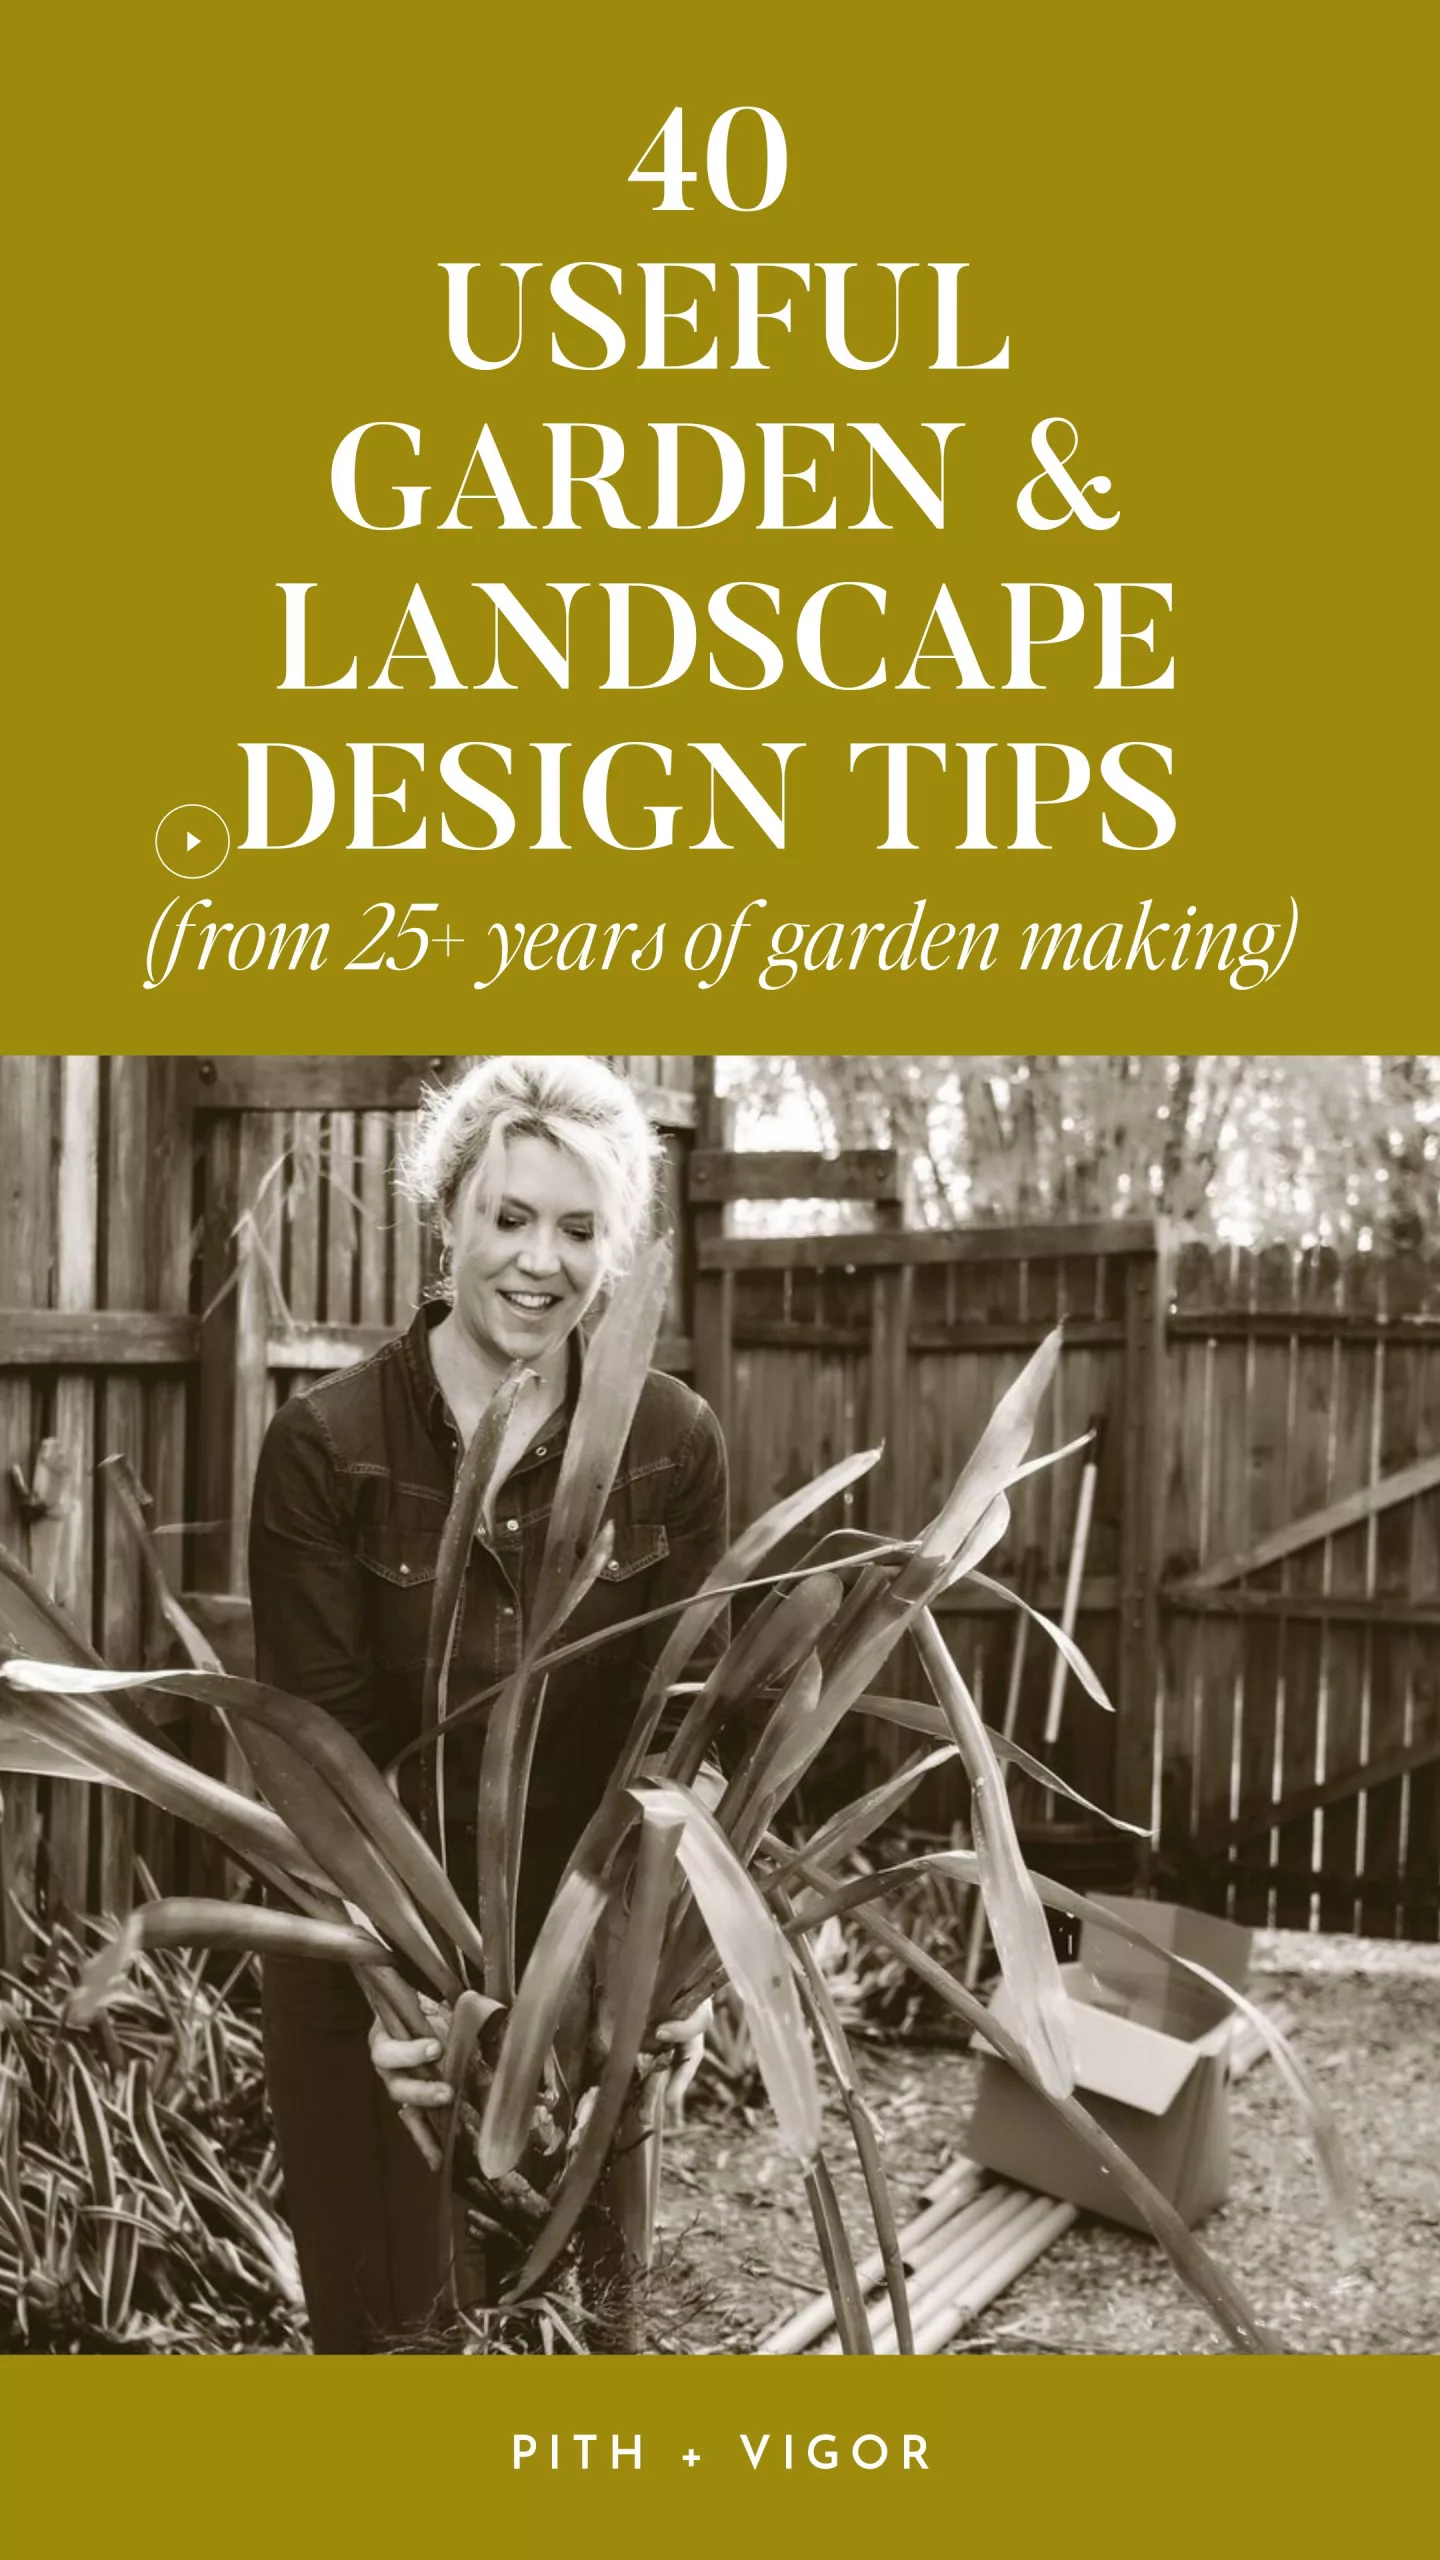 Discover 40 valuable garden and landscape design tips accumulated over 25 years of garden making, providing insight into basic landscape design principles and offering guidance on how to design a stunning garden.